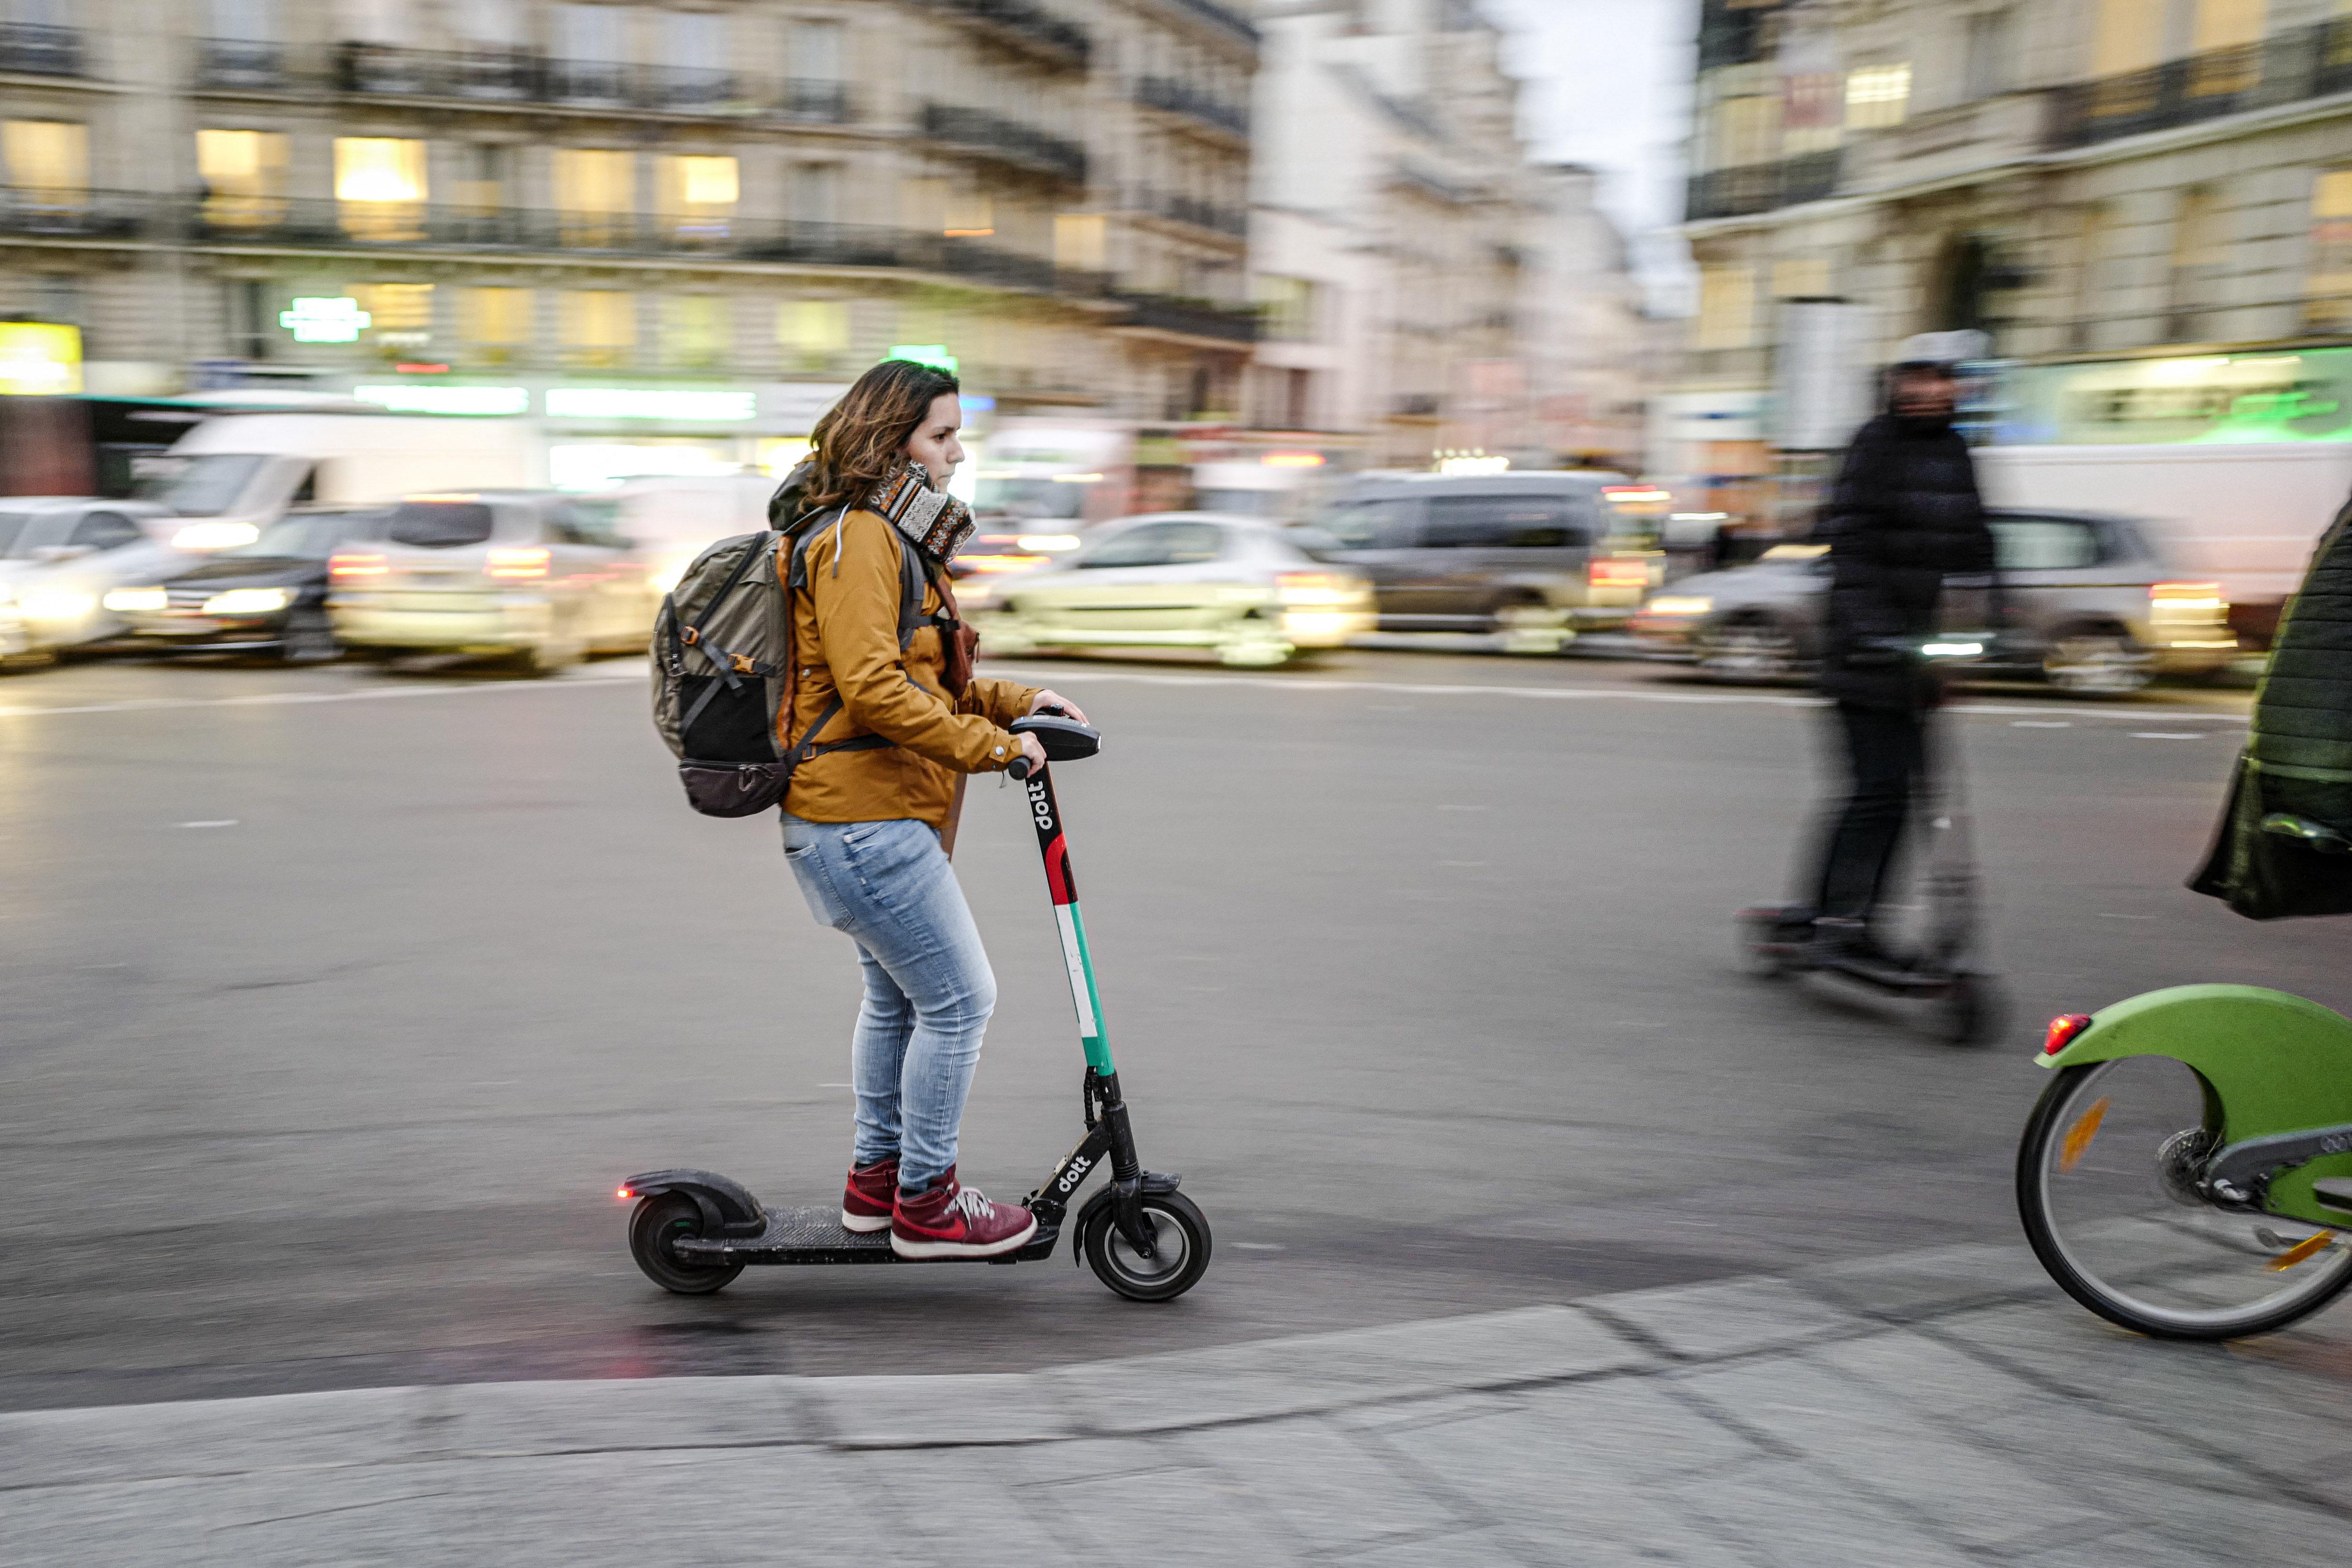 Paris limits speed of e-scooters to 10 kph in certain zones